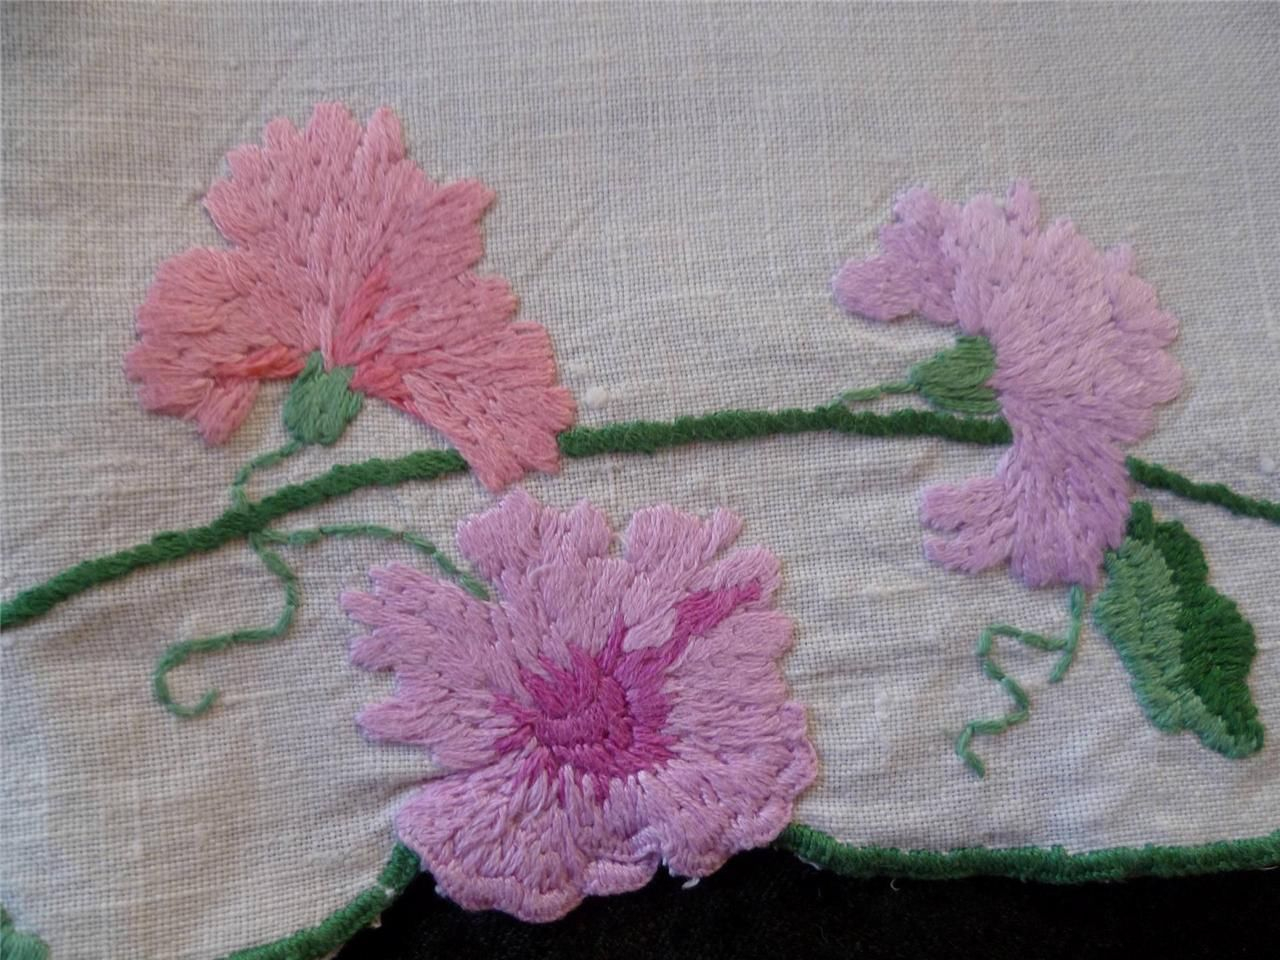 Crochet Sweet Pea Flower Pattern Exquisite Vintage Plump Sweet Peas Hand Embroidered Tablecloth